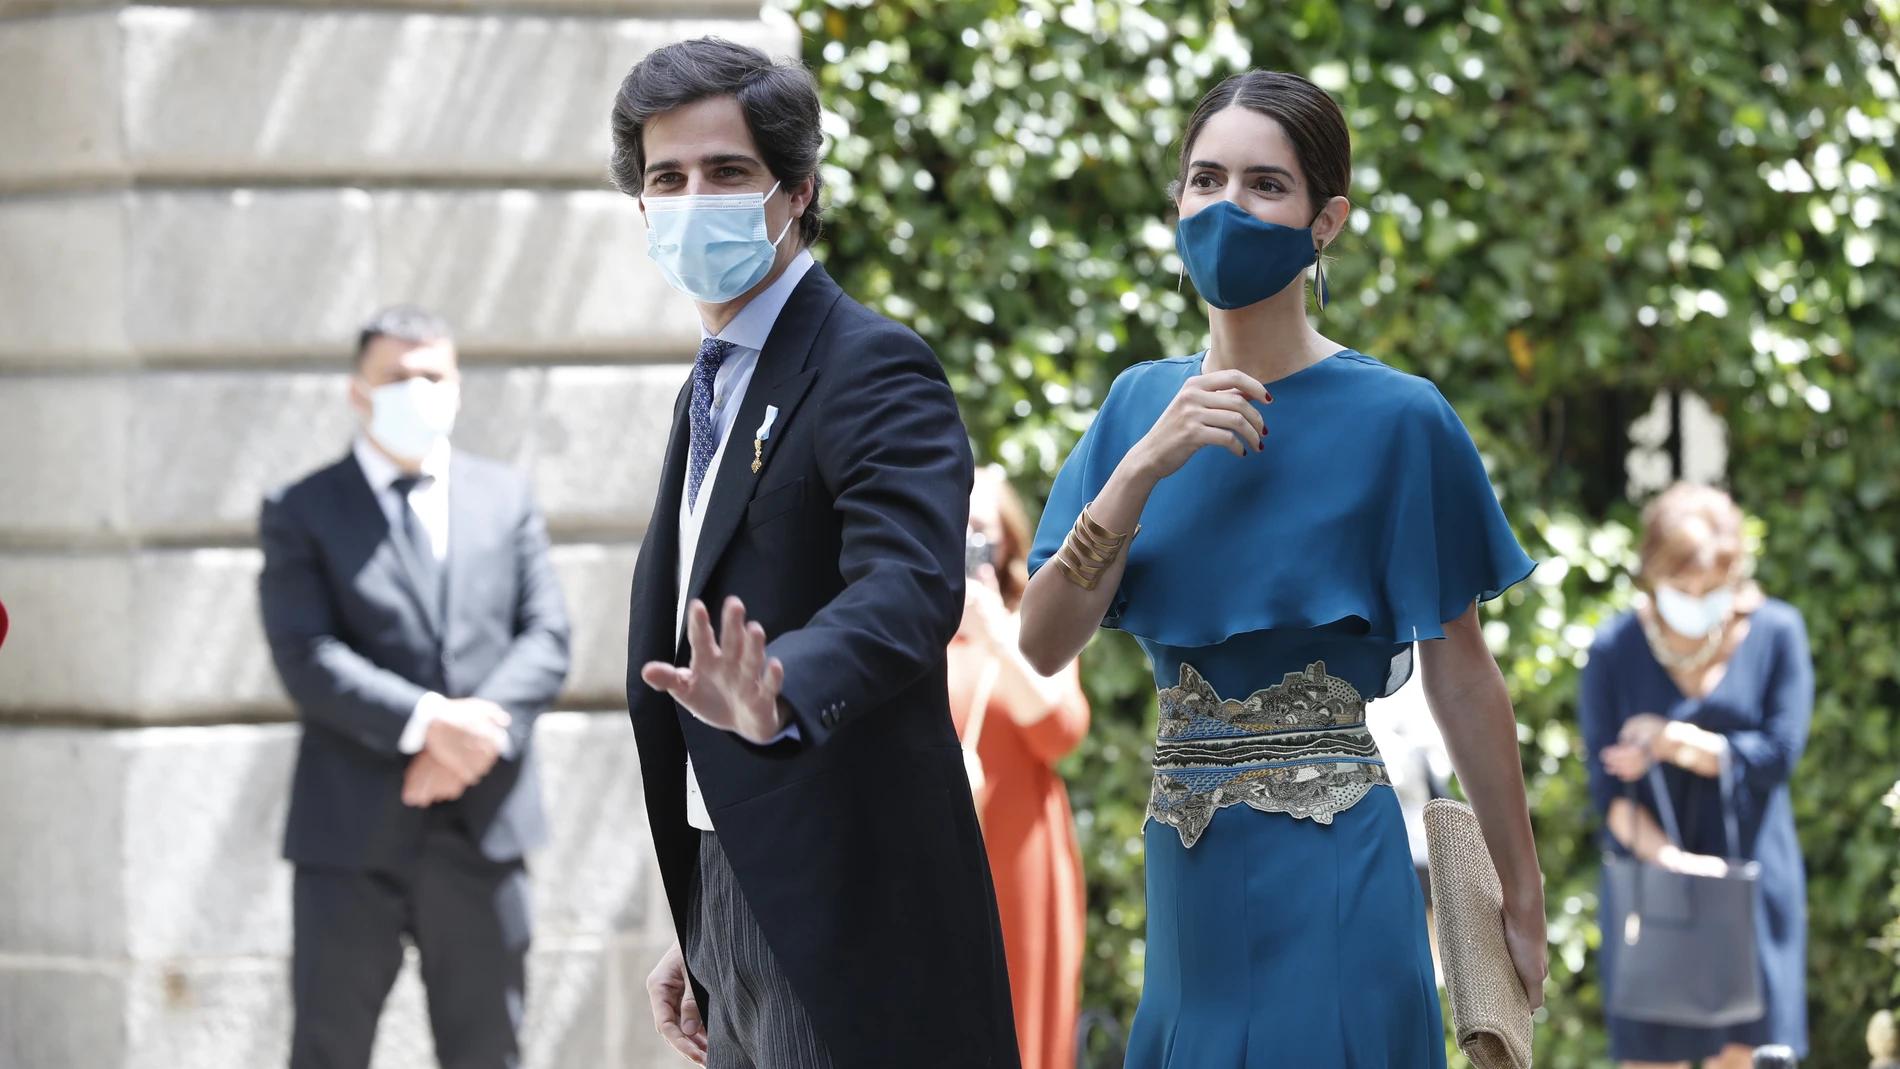 Fernando Fitz James and Sofia Palazuelo during the wedding of Carlos Fitz James Stuart y Solis and Belen Corsini in Madrid on Saturday, 22 May 2021